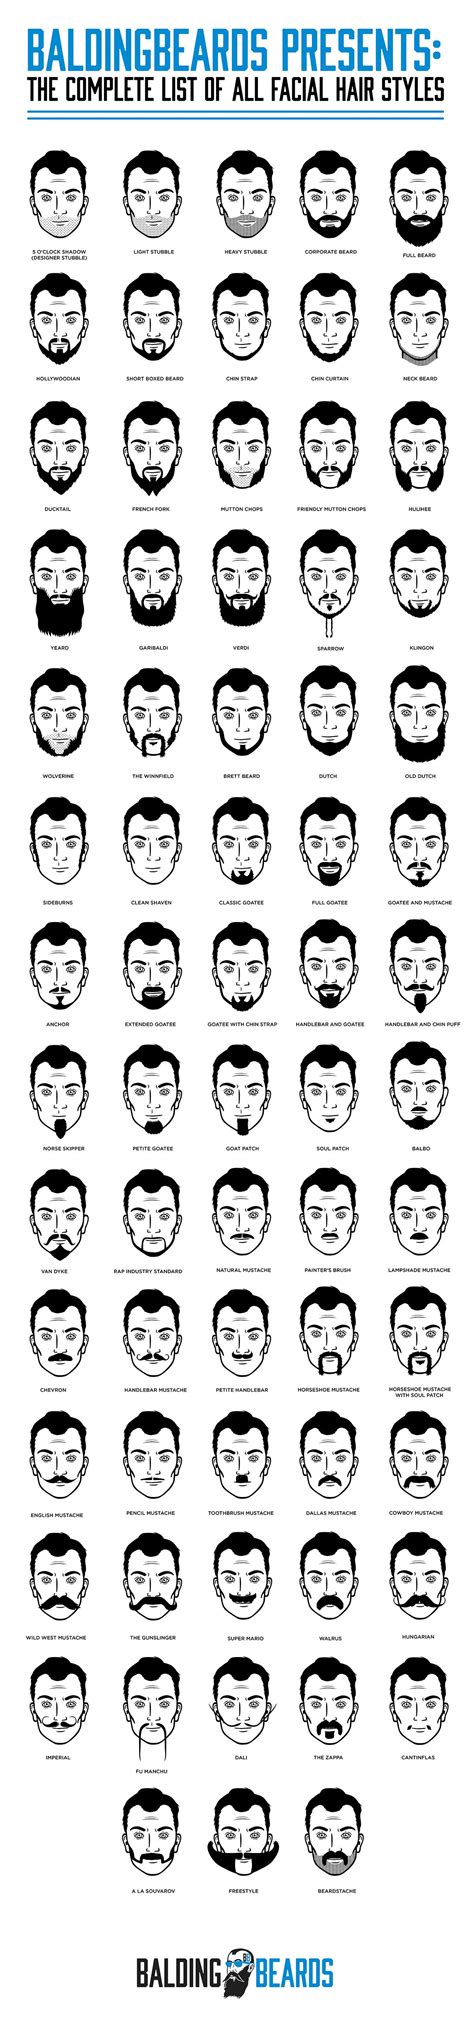 For inspiration and ideas, we've compiled the best haircuts for men to get right now. The Complete List Of All Facial Hair Styles #Infographic ...